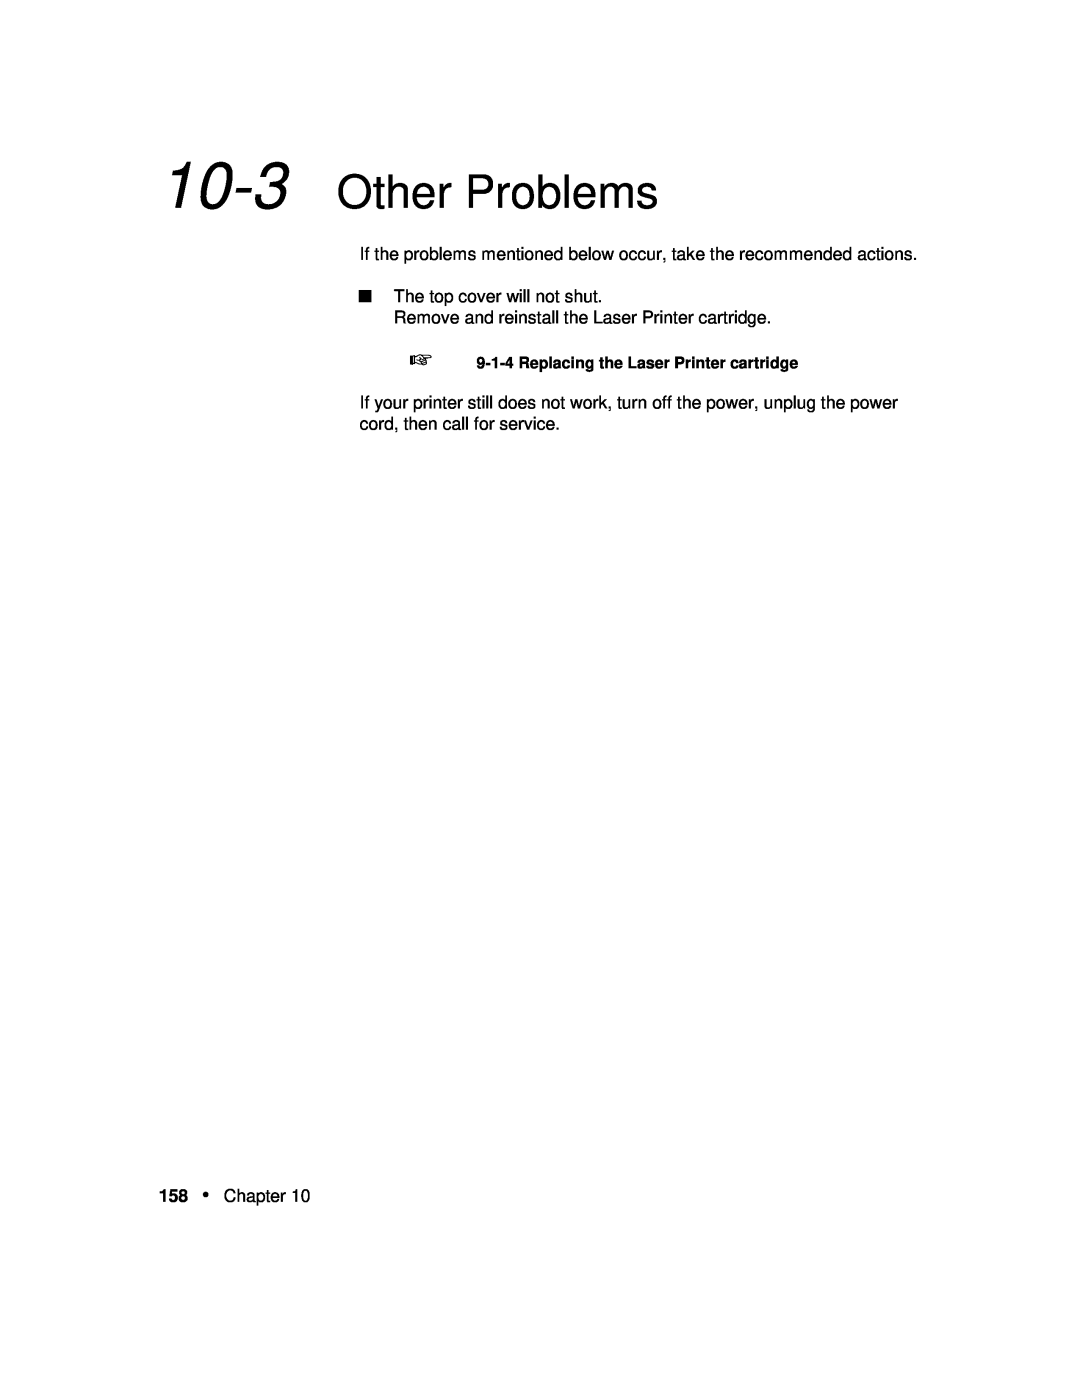 Xerox P12 Other Problems, If the problems mentioned below occur, take the recommended actions, The top cover will not shut 